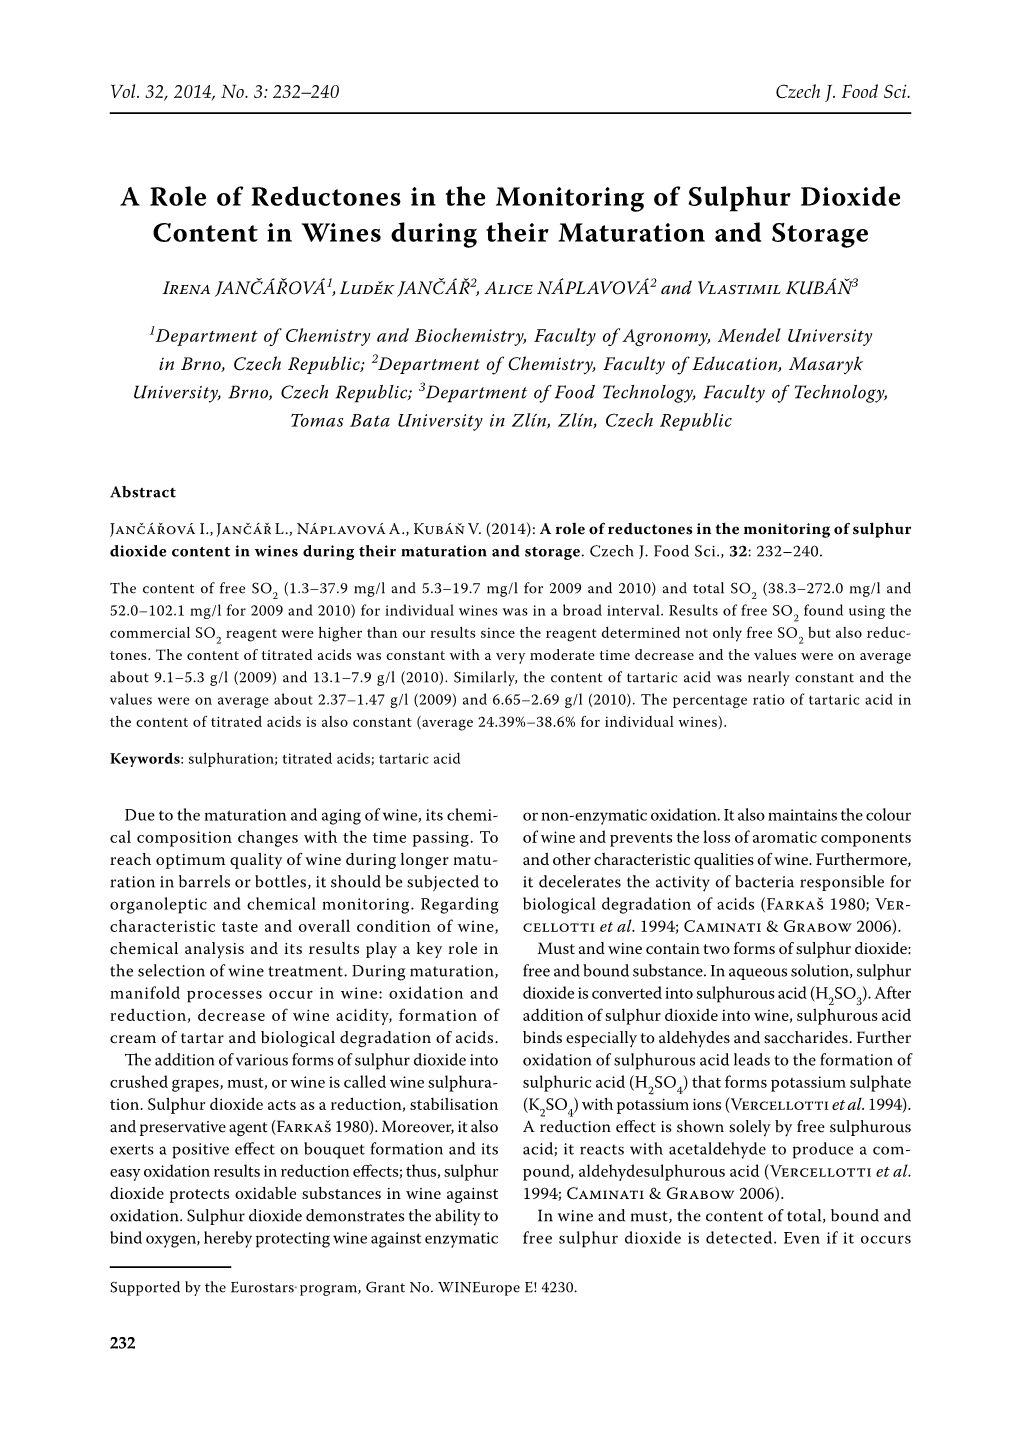 A Role of Reductones in the Monitoring of Sulphur Dioxide Content in Wines During Their Maturation and Storage